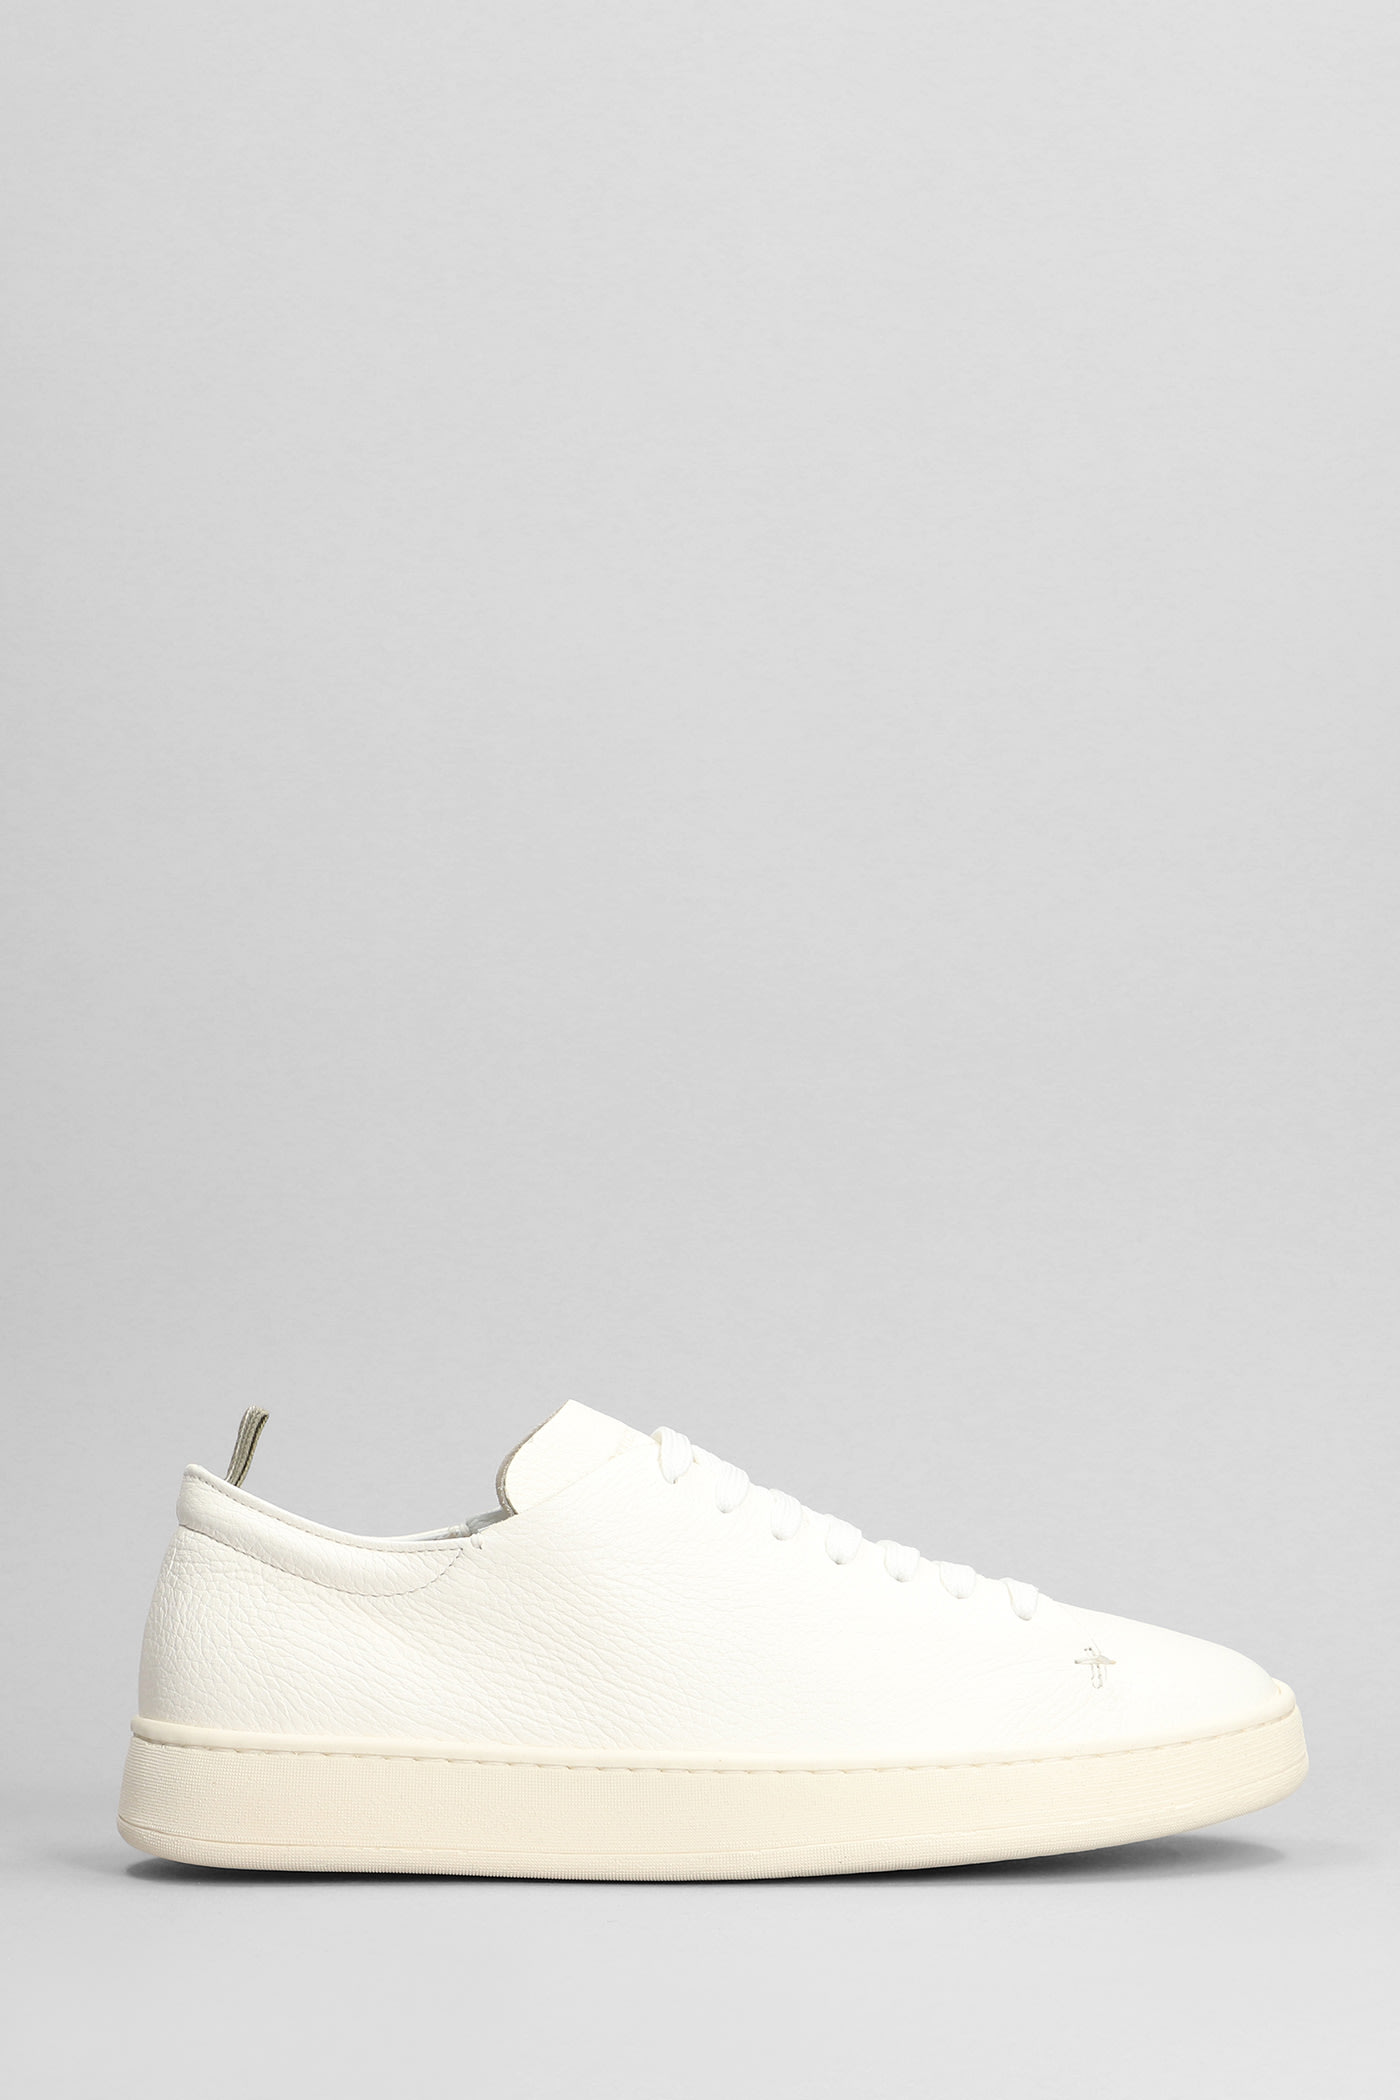 Officine Creative Once 002 Trainers In White Leather